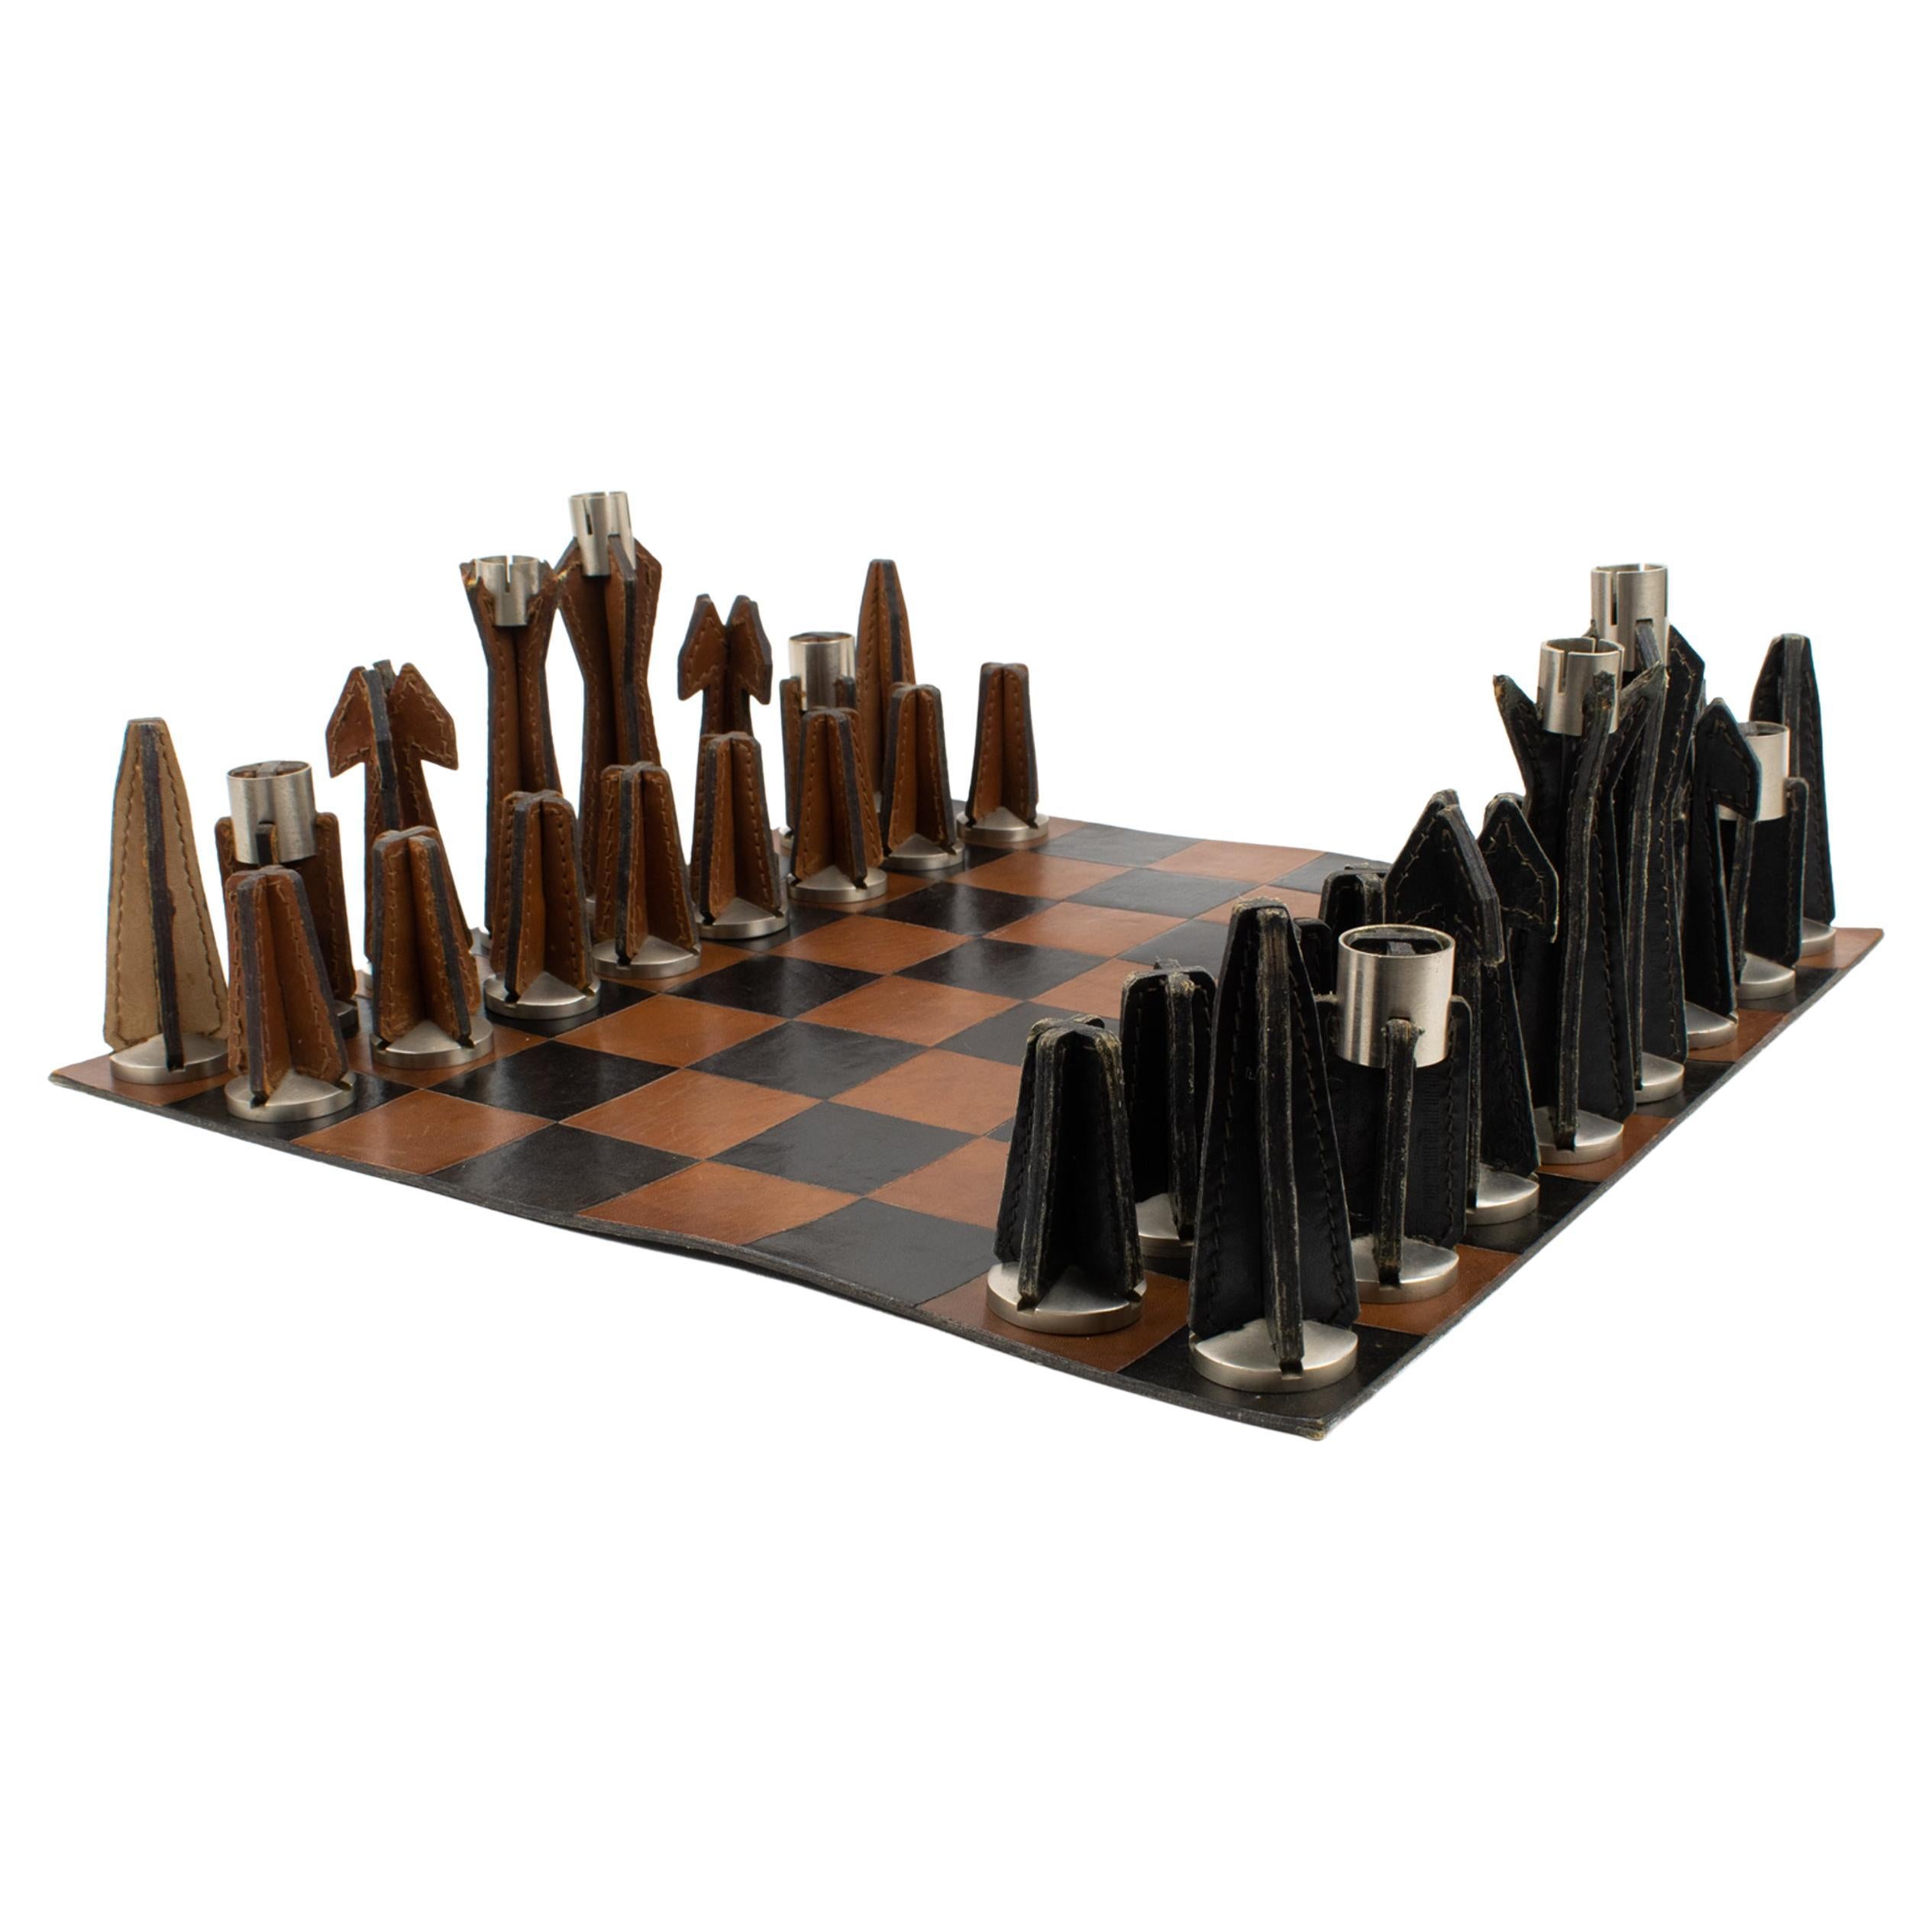 Jacques Adnet Hand-Stitched Black and Cognac Leather Chess Board and Set For Sale